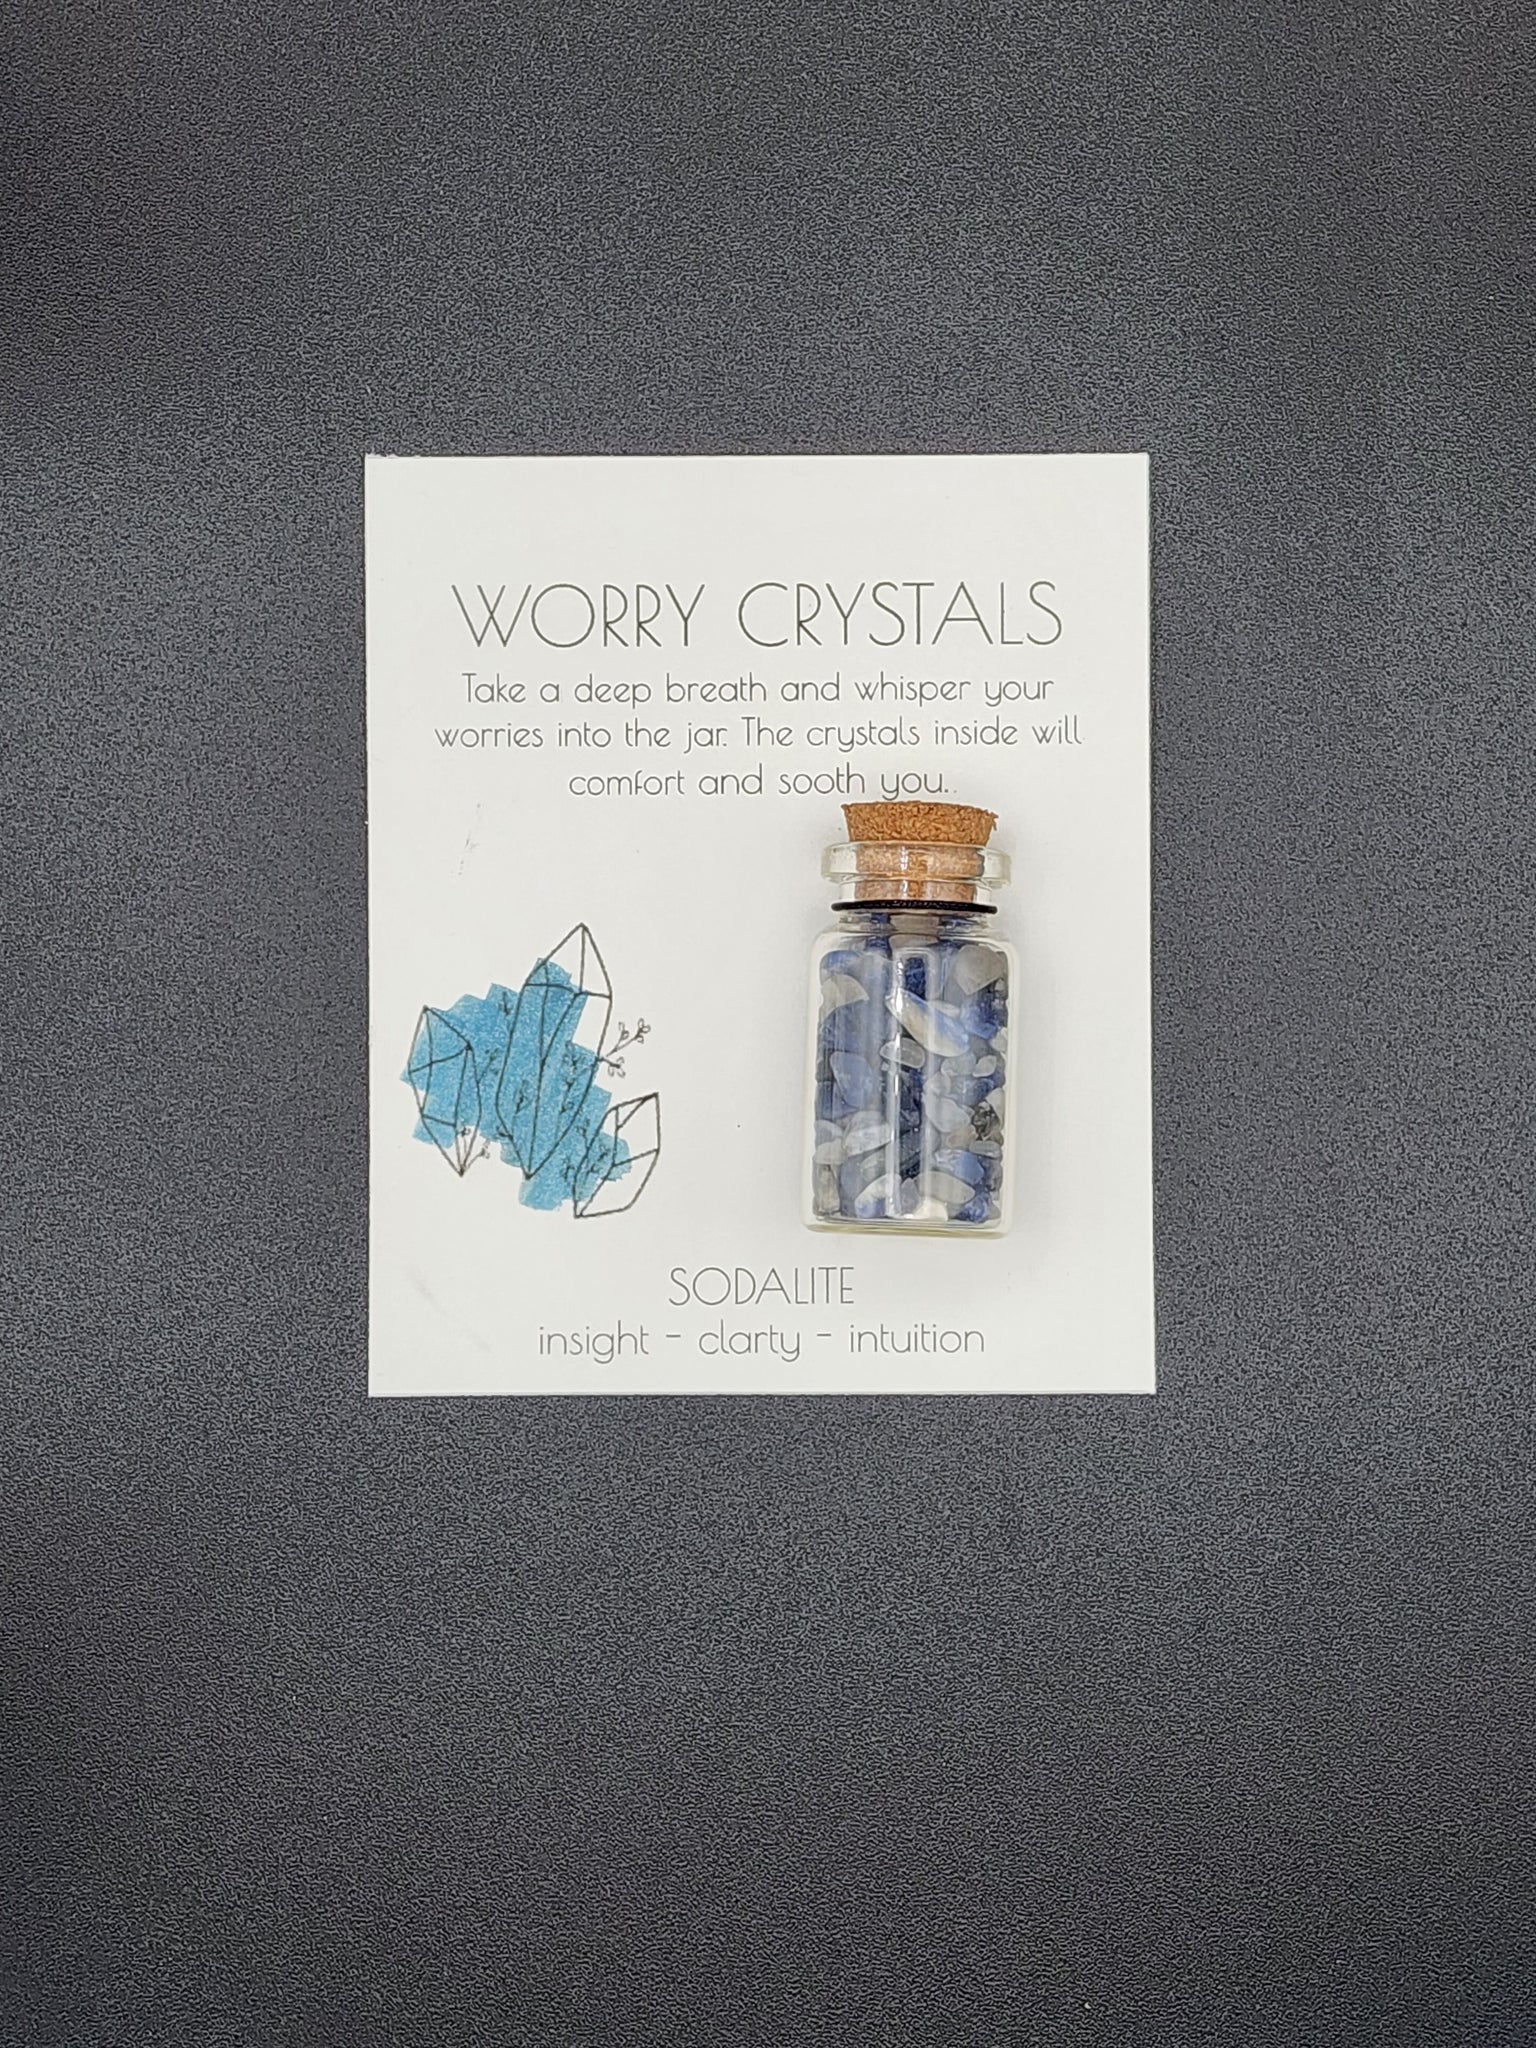 Sodilite Worry Crysals  - Large